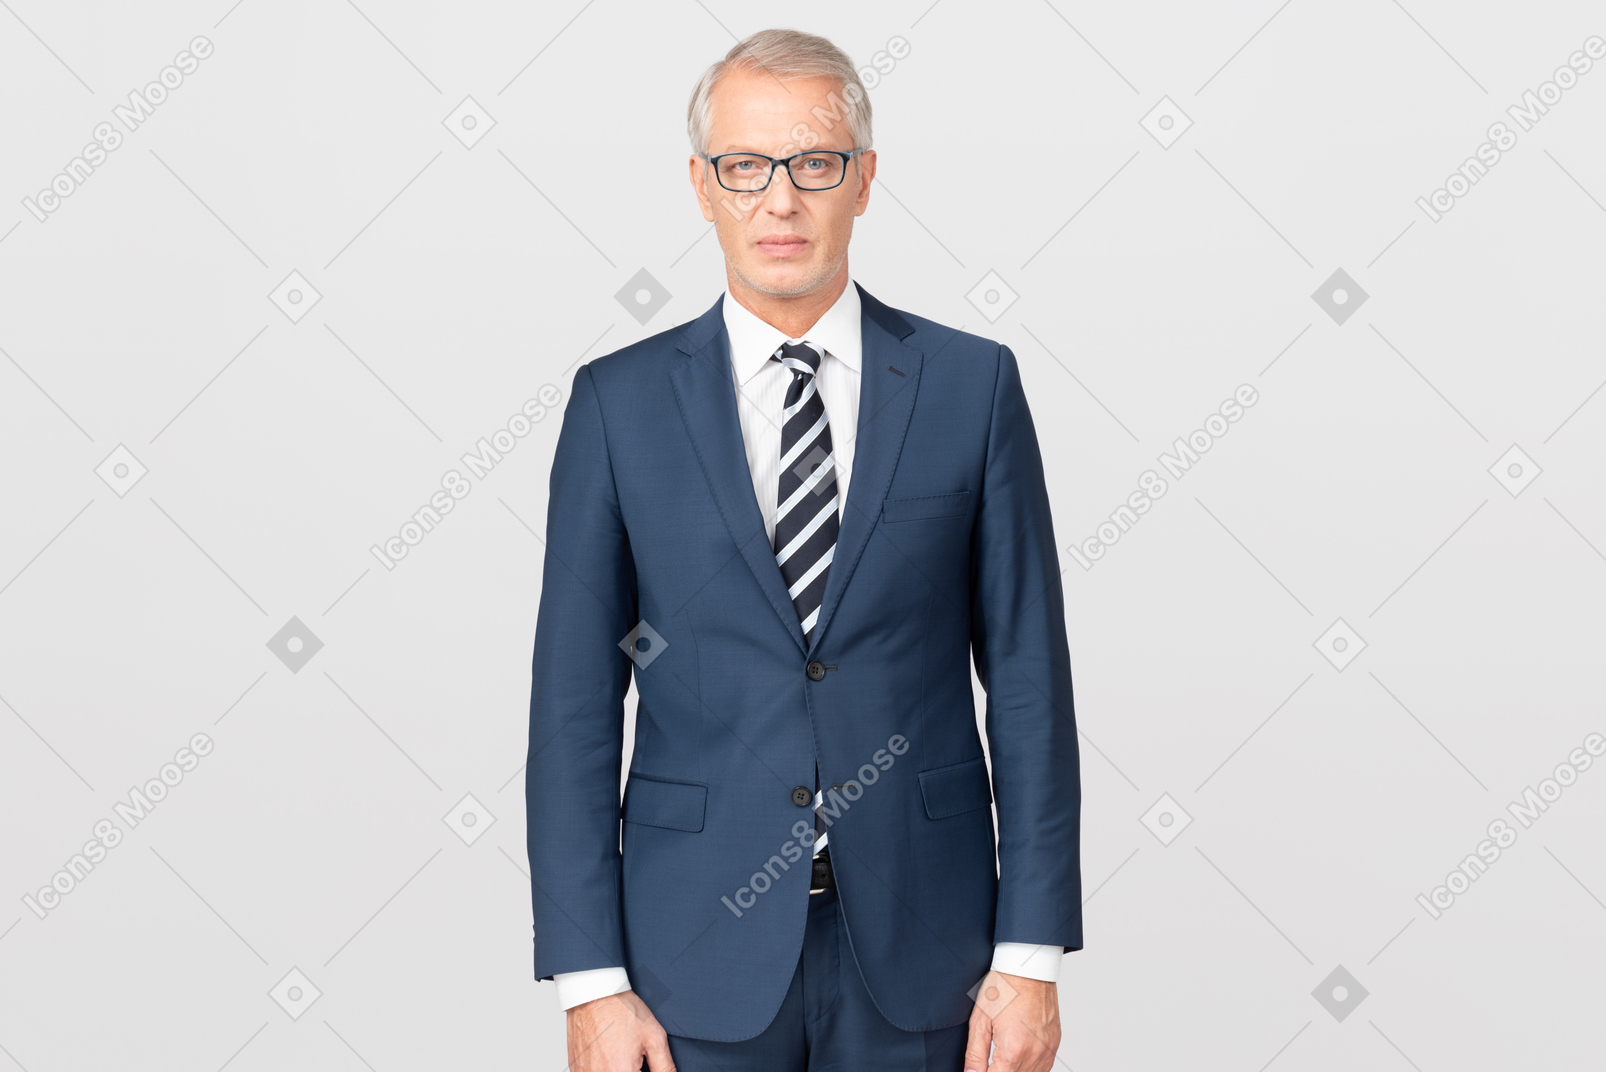 Handsome middle-aged man standing straight